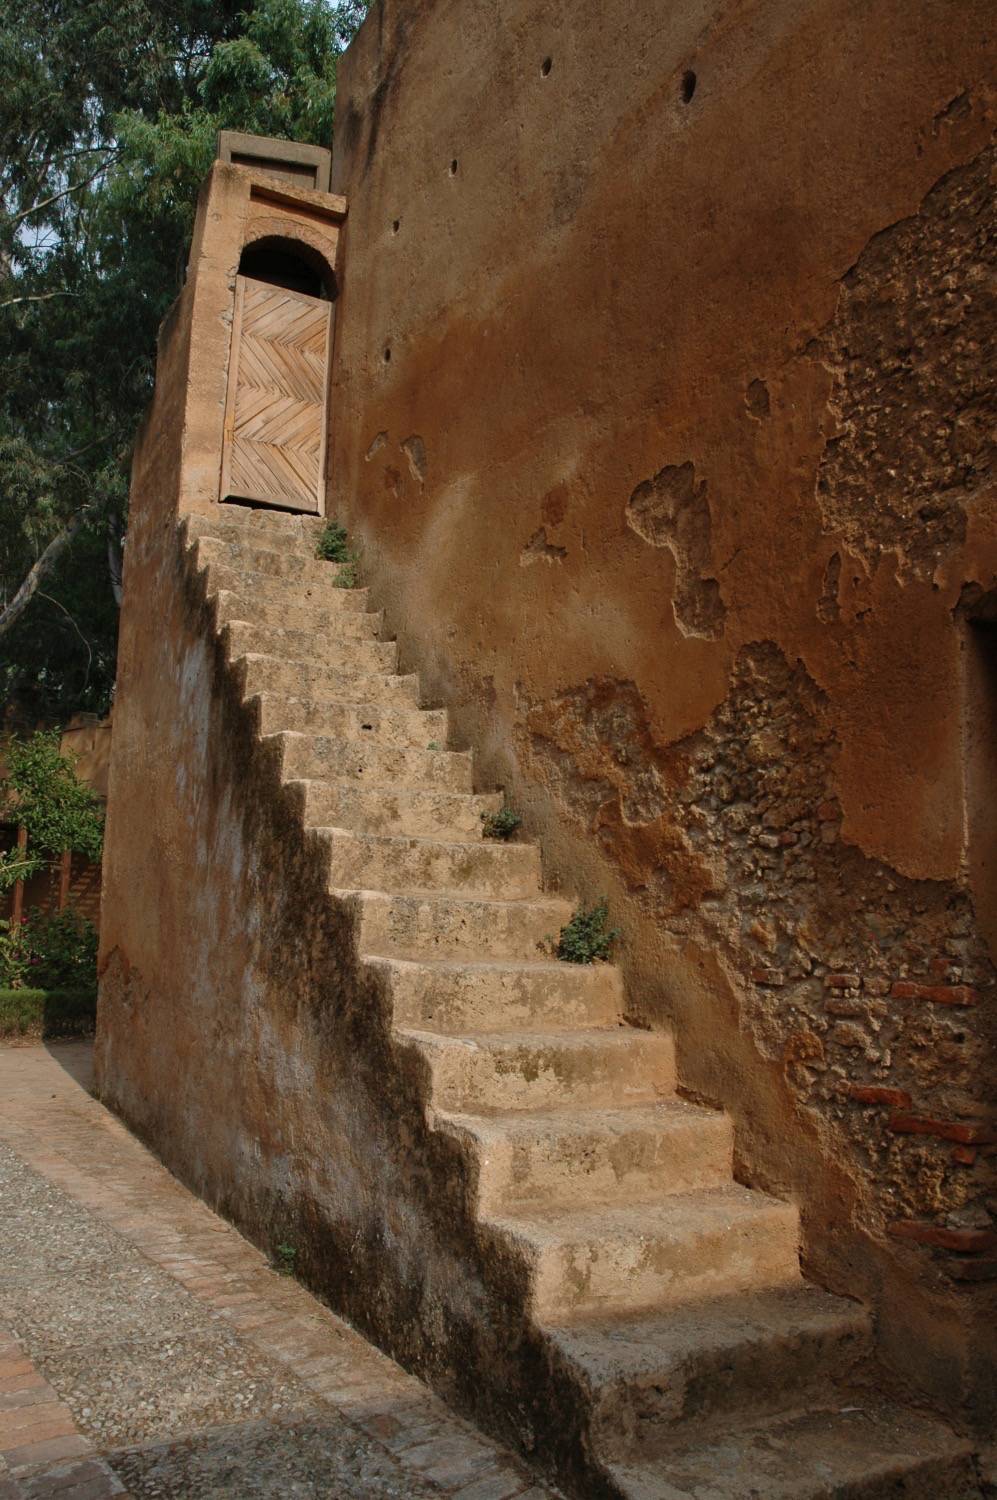 An exterior staircase in the city walls